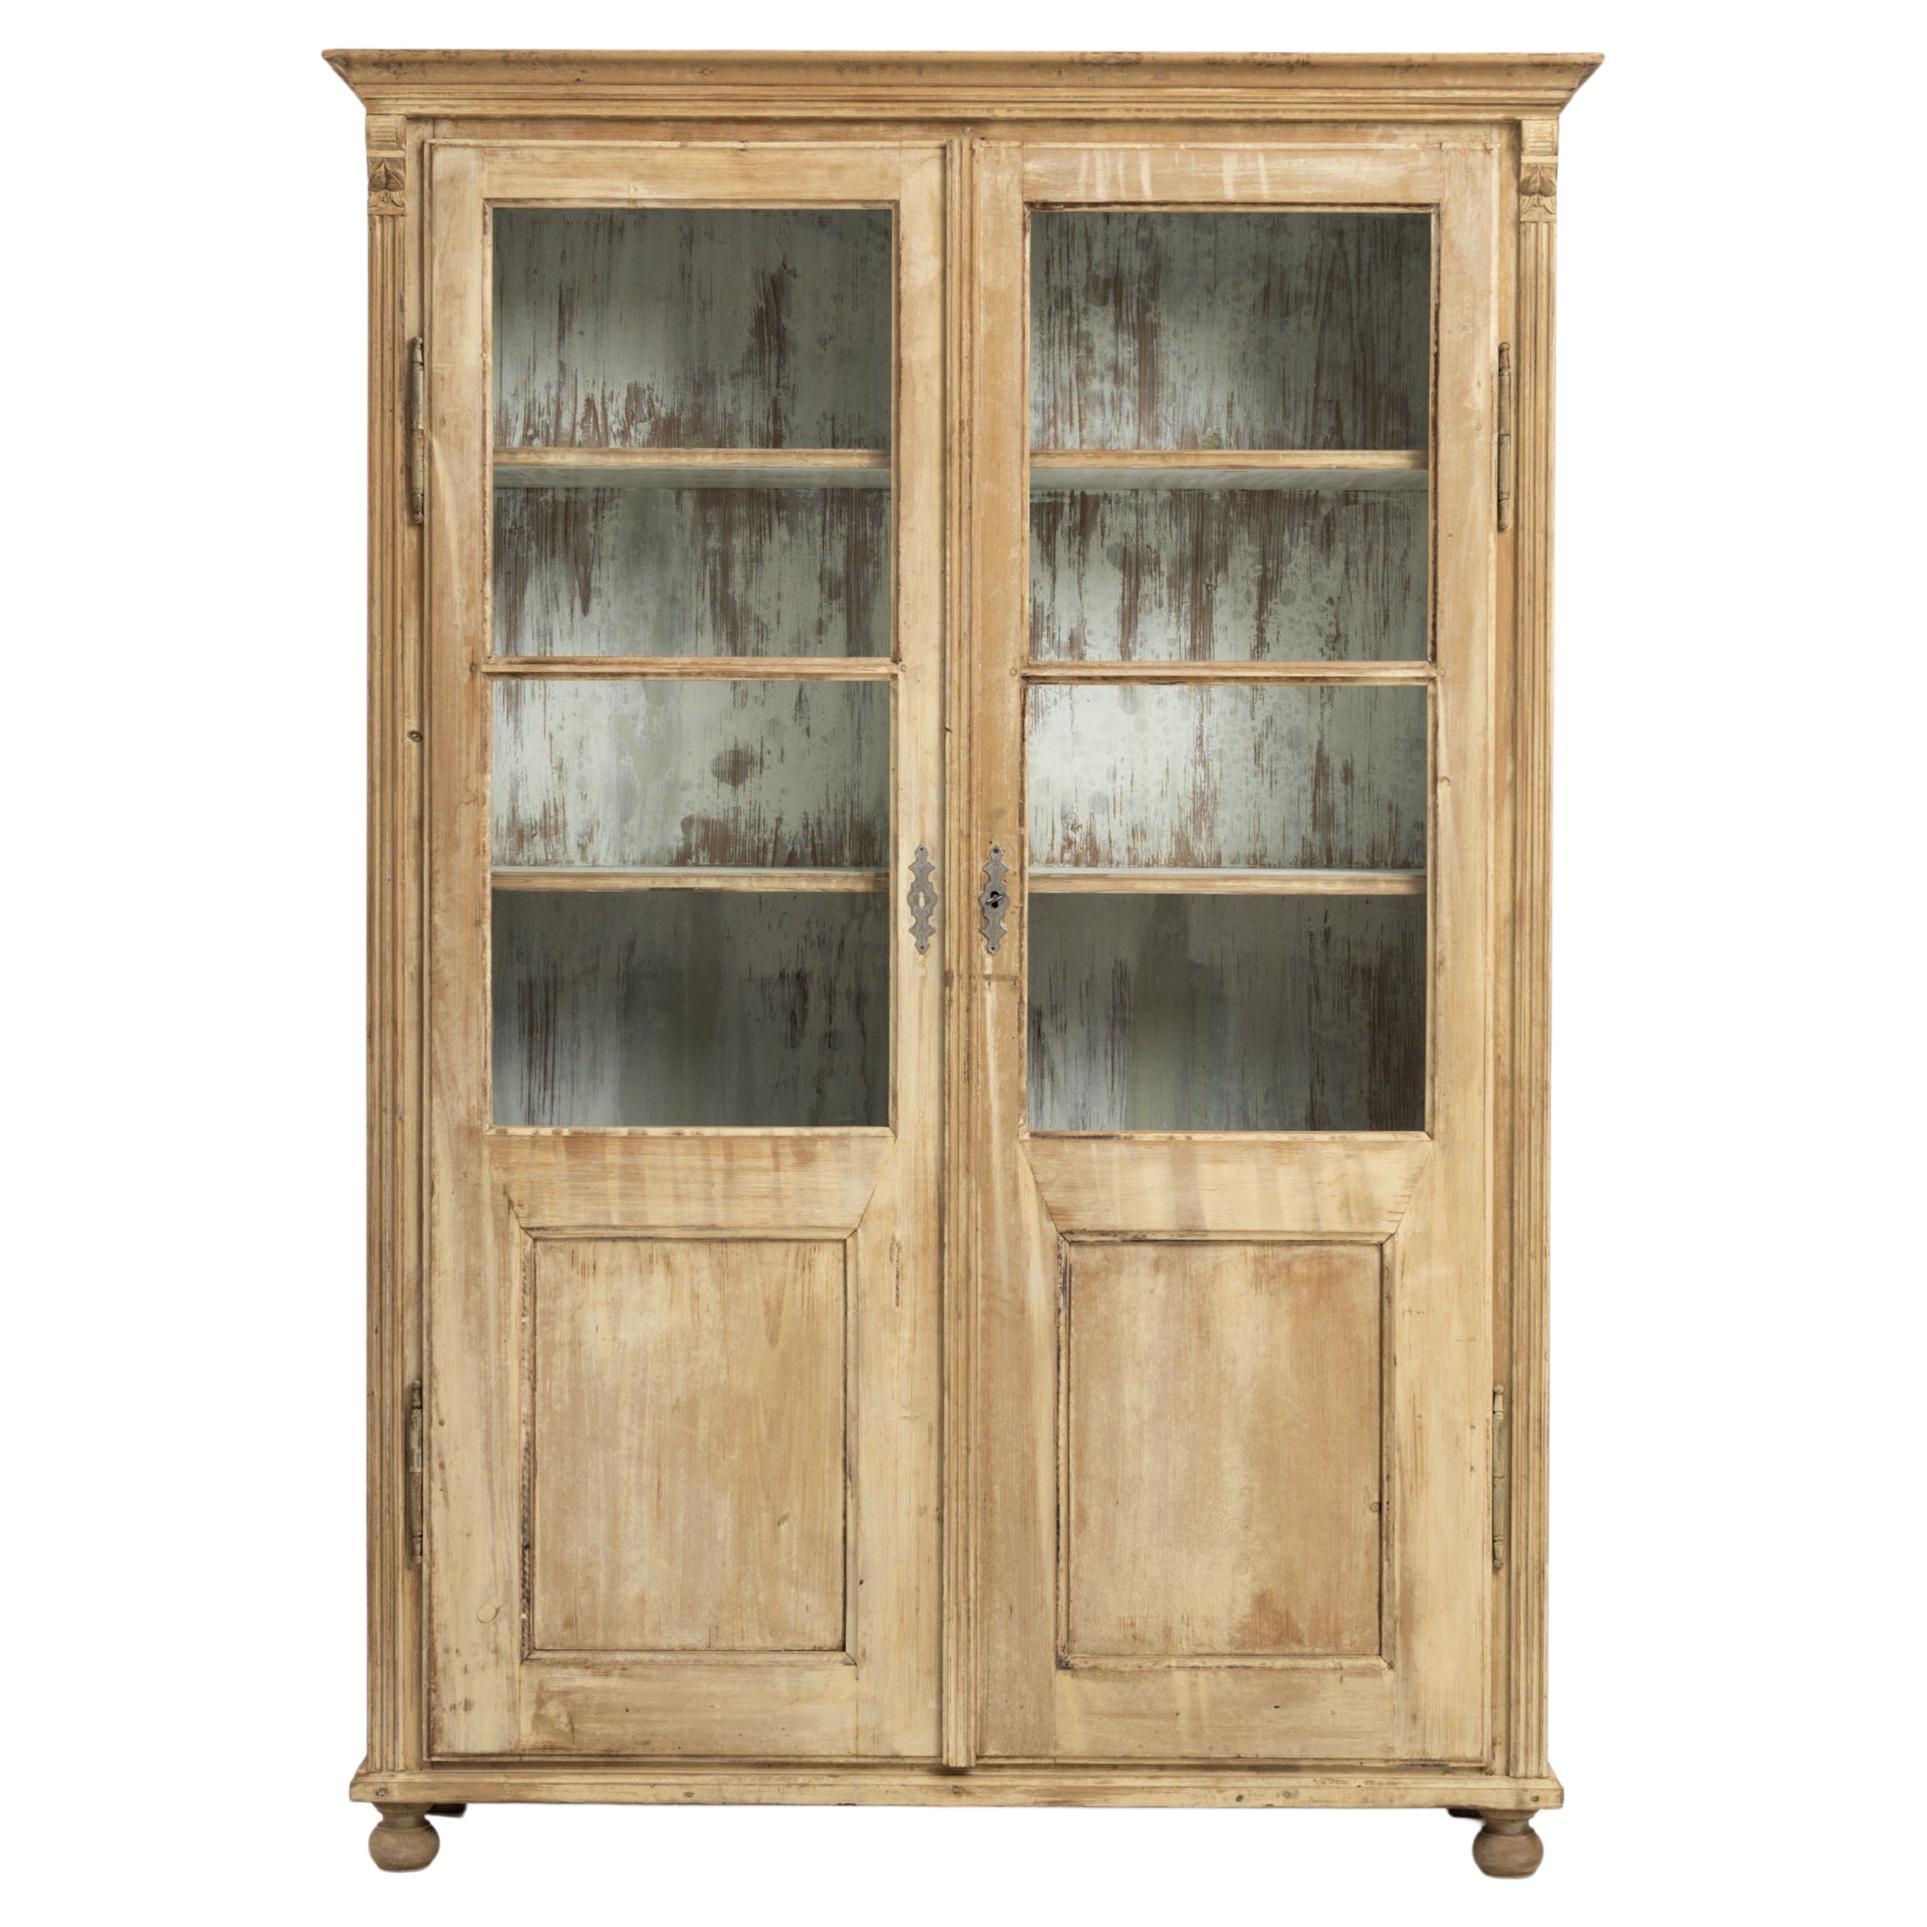 19th Century Central Europe Wooden Patinated Vitrine